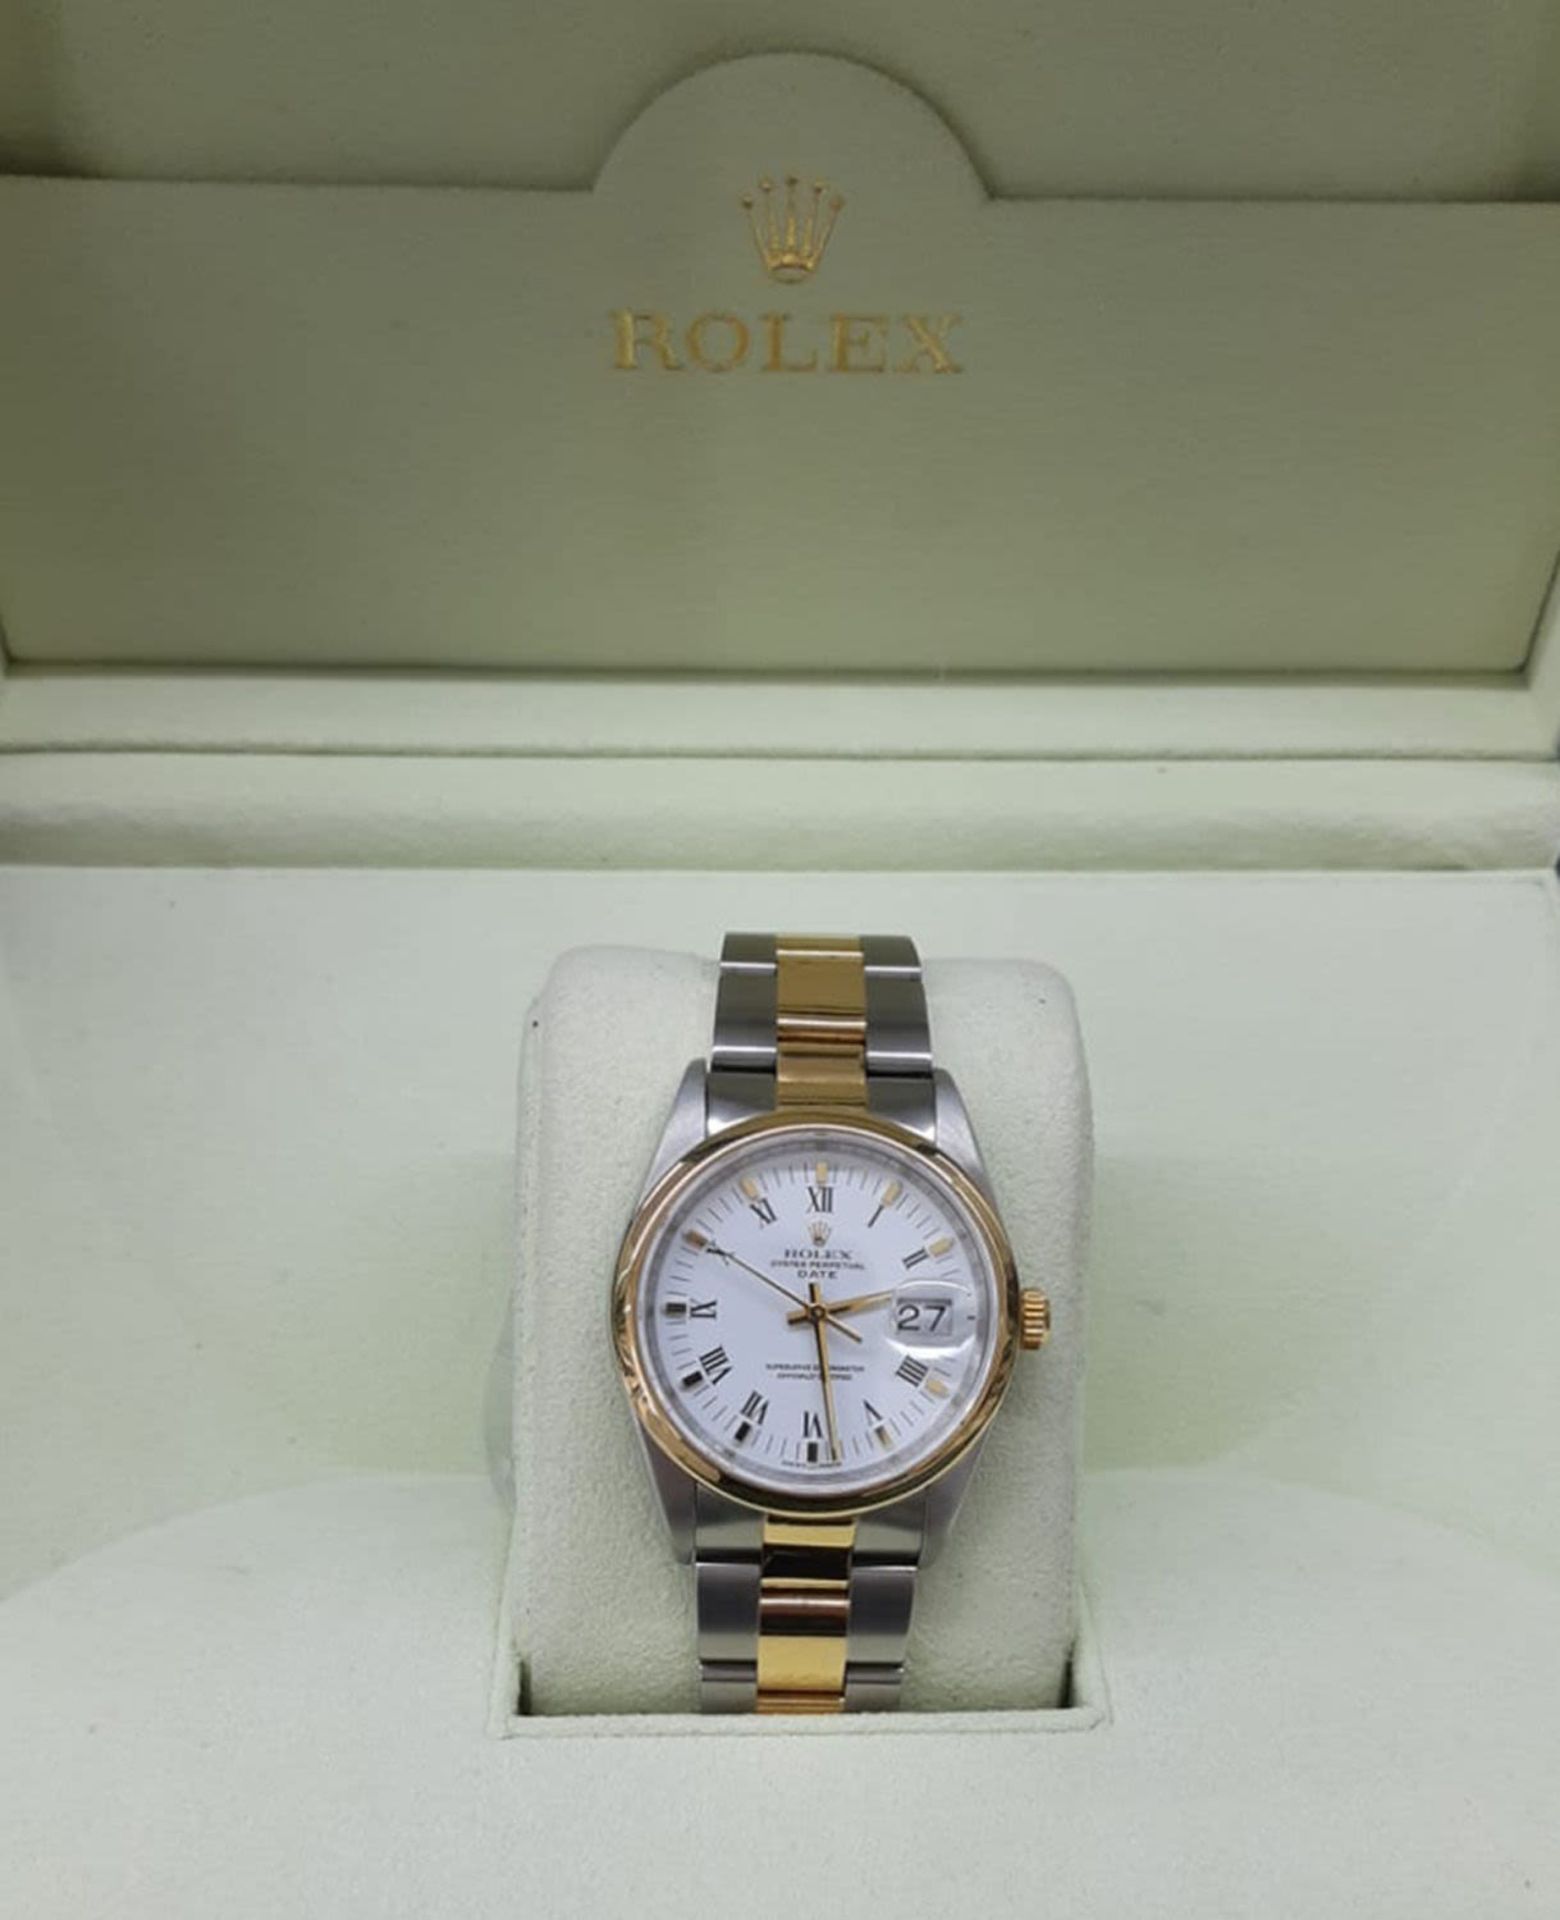 Rolex Oyster Perpetual Date, unisex cadet size, in steel and 18k gold - Image 3 of 3